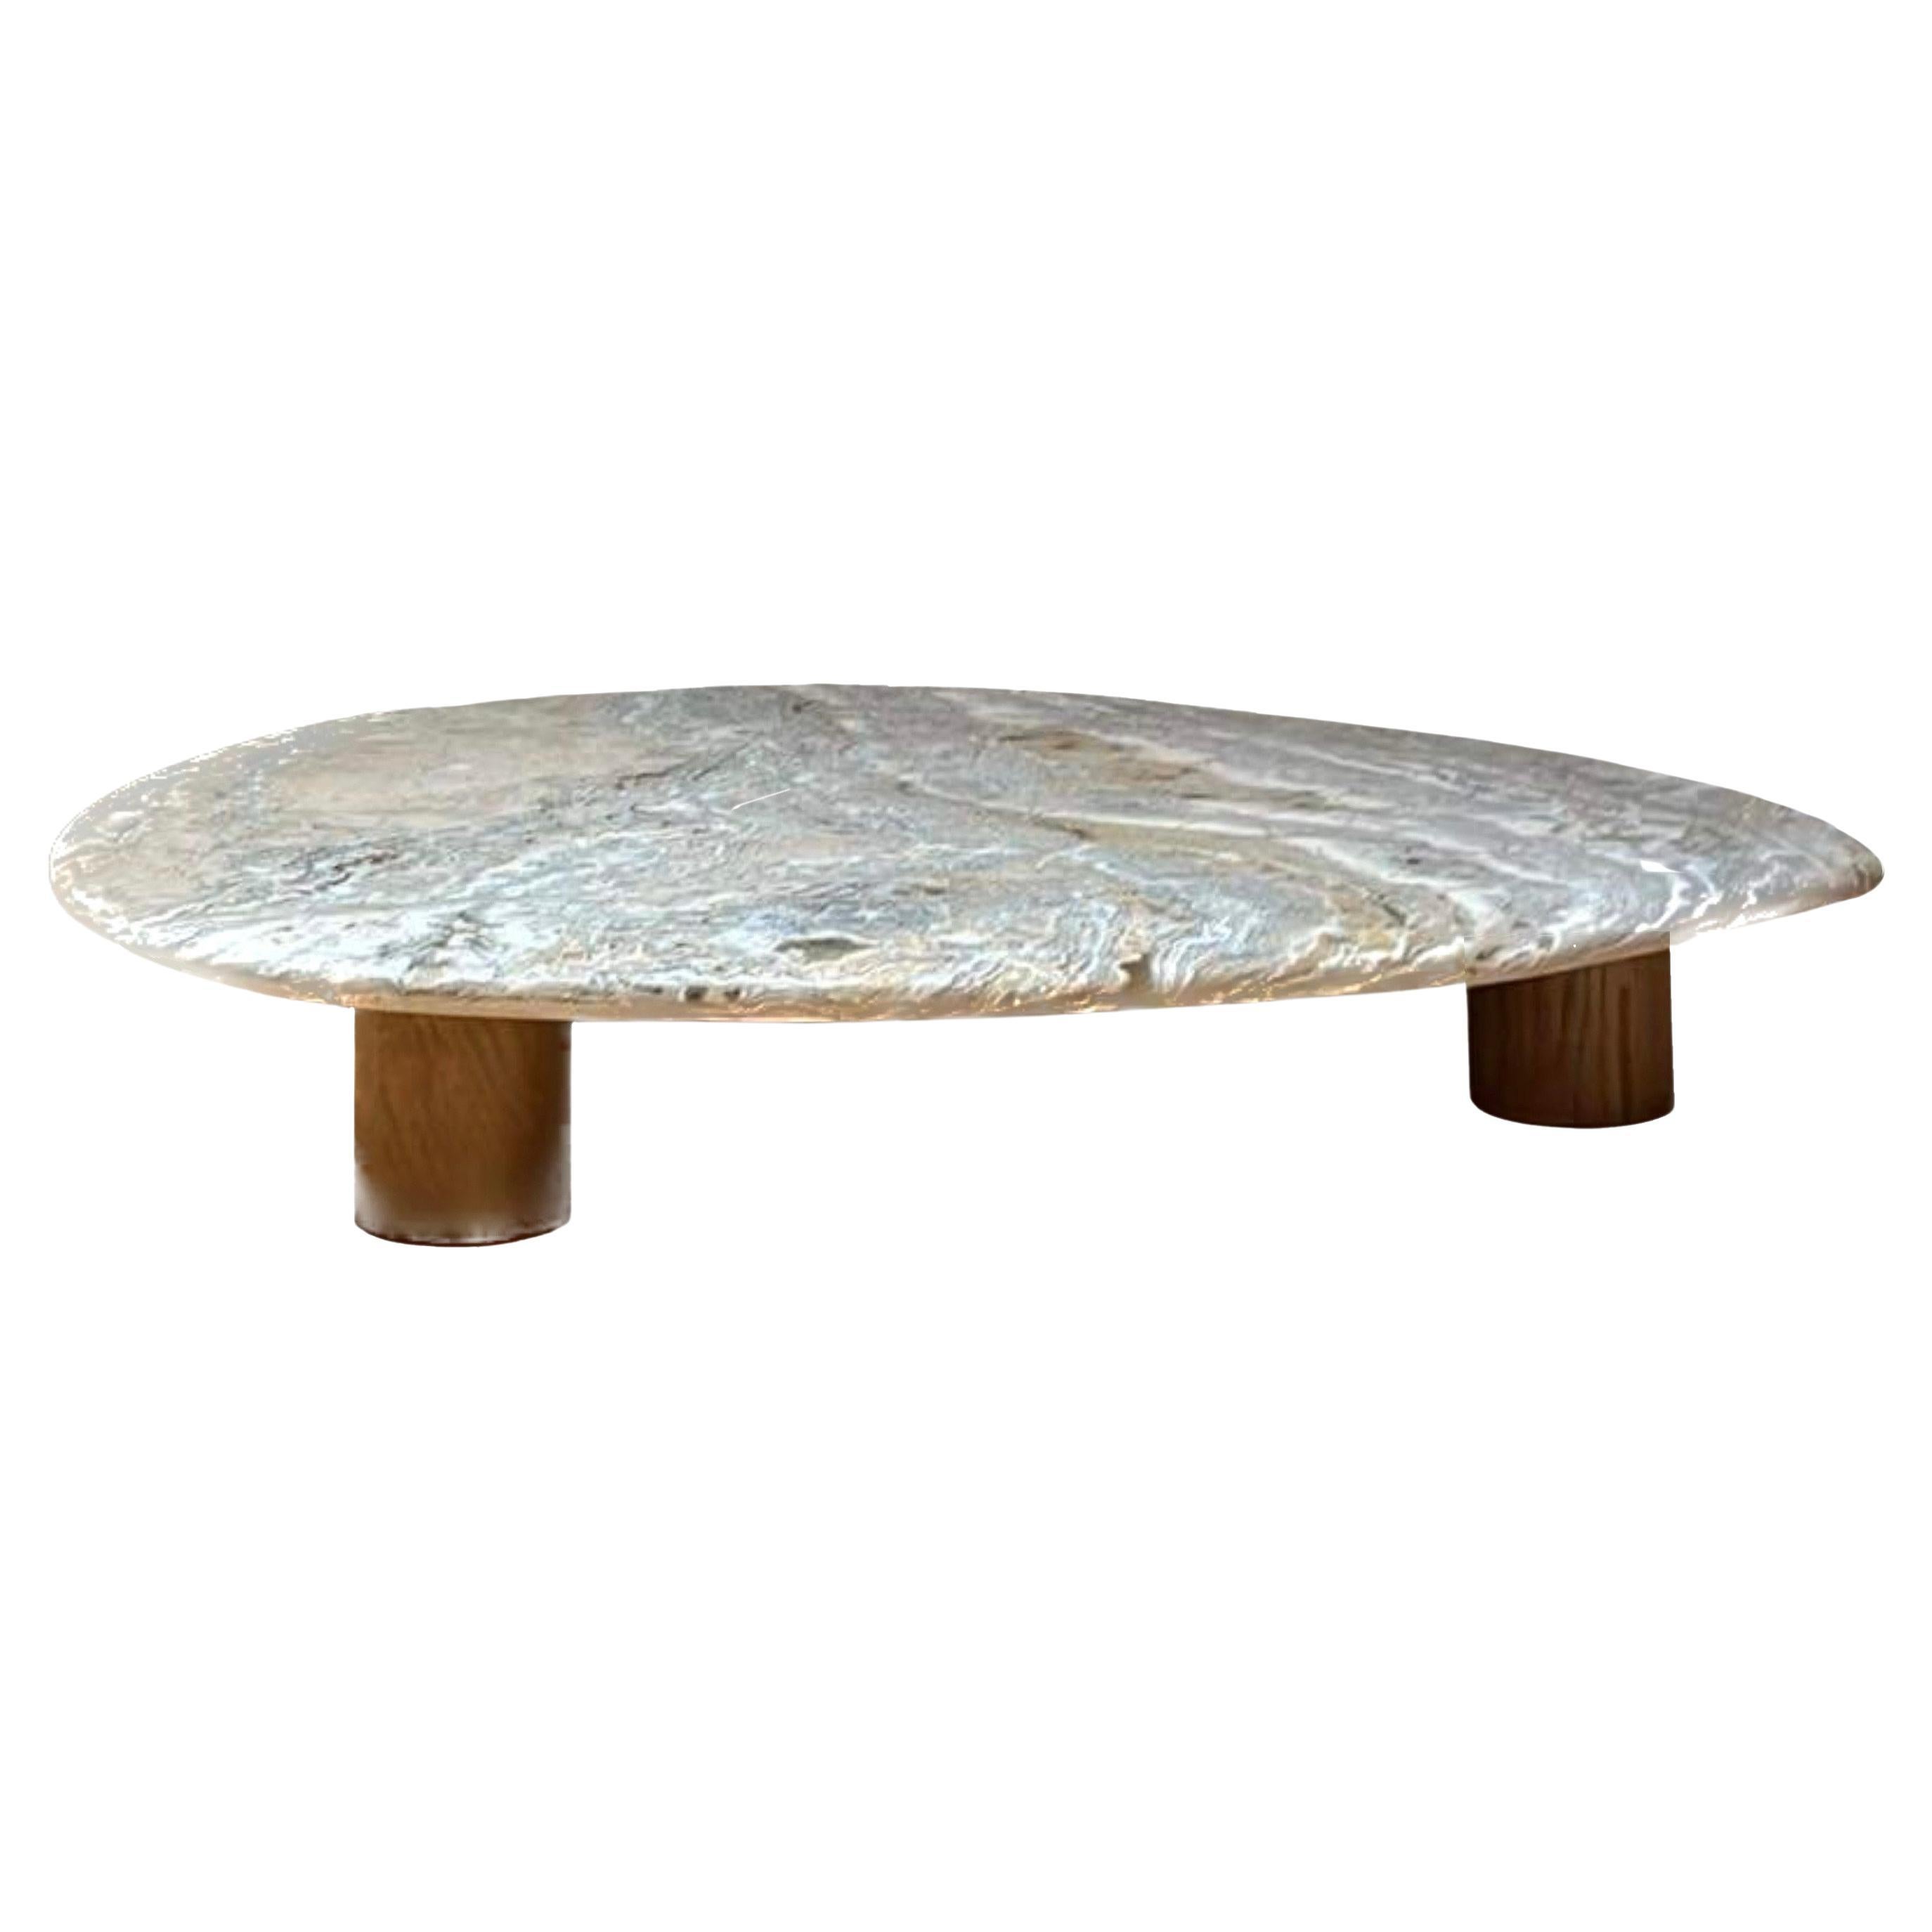 TK Skimming Stone Coffee Table For Sale